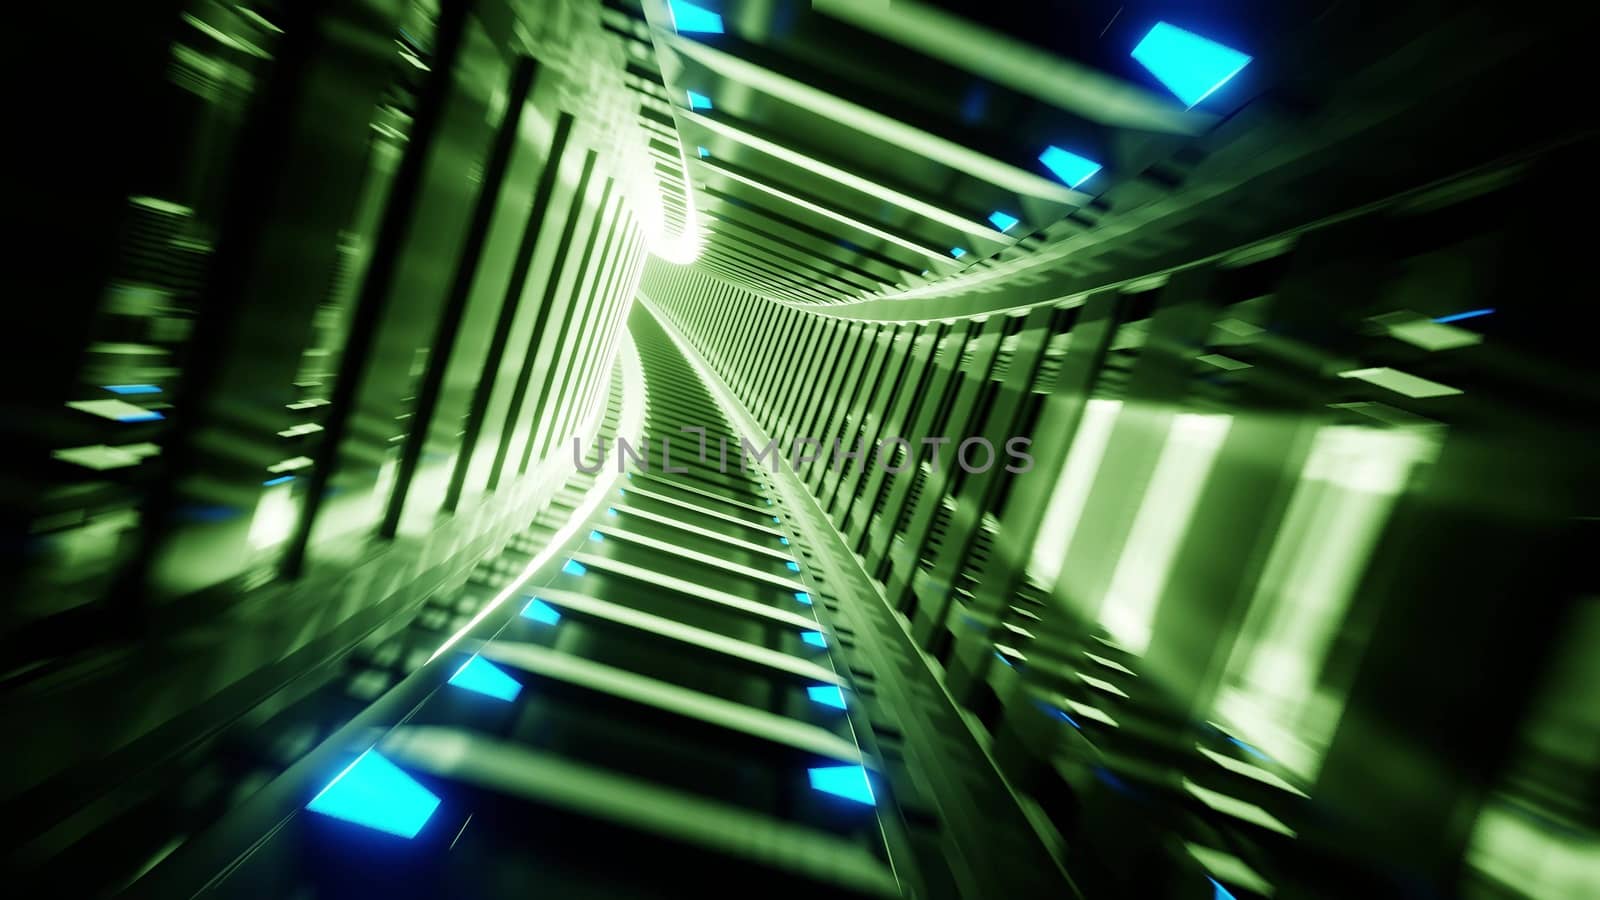 abwtract glowing futuristic scifi subway tunnel corridor 3d rendering wallpaper background design by tunnelmotions